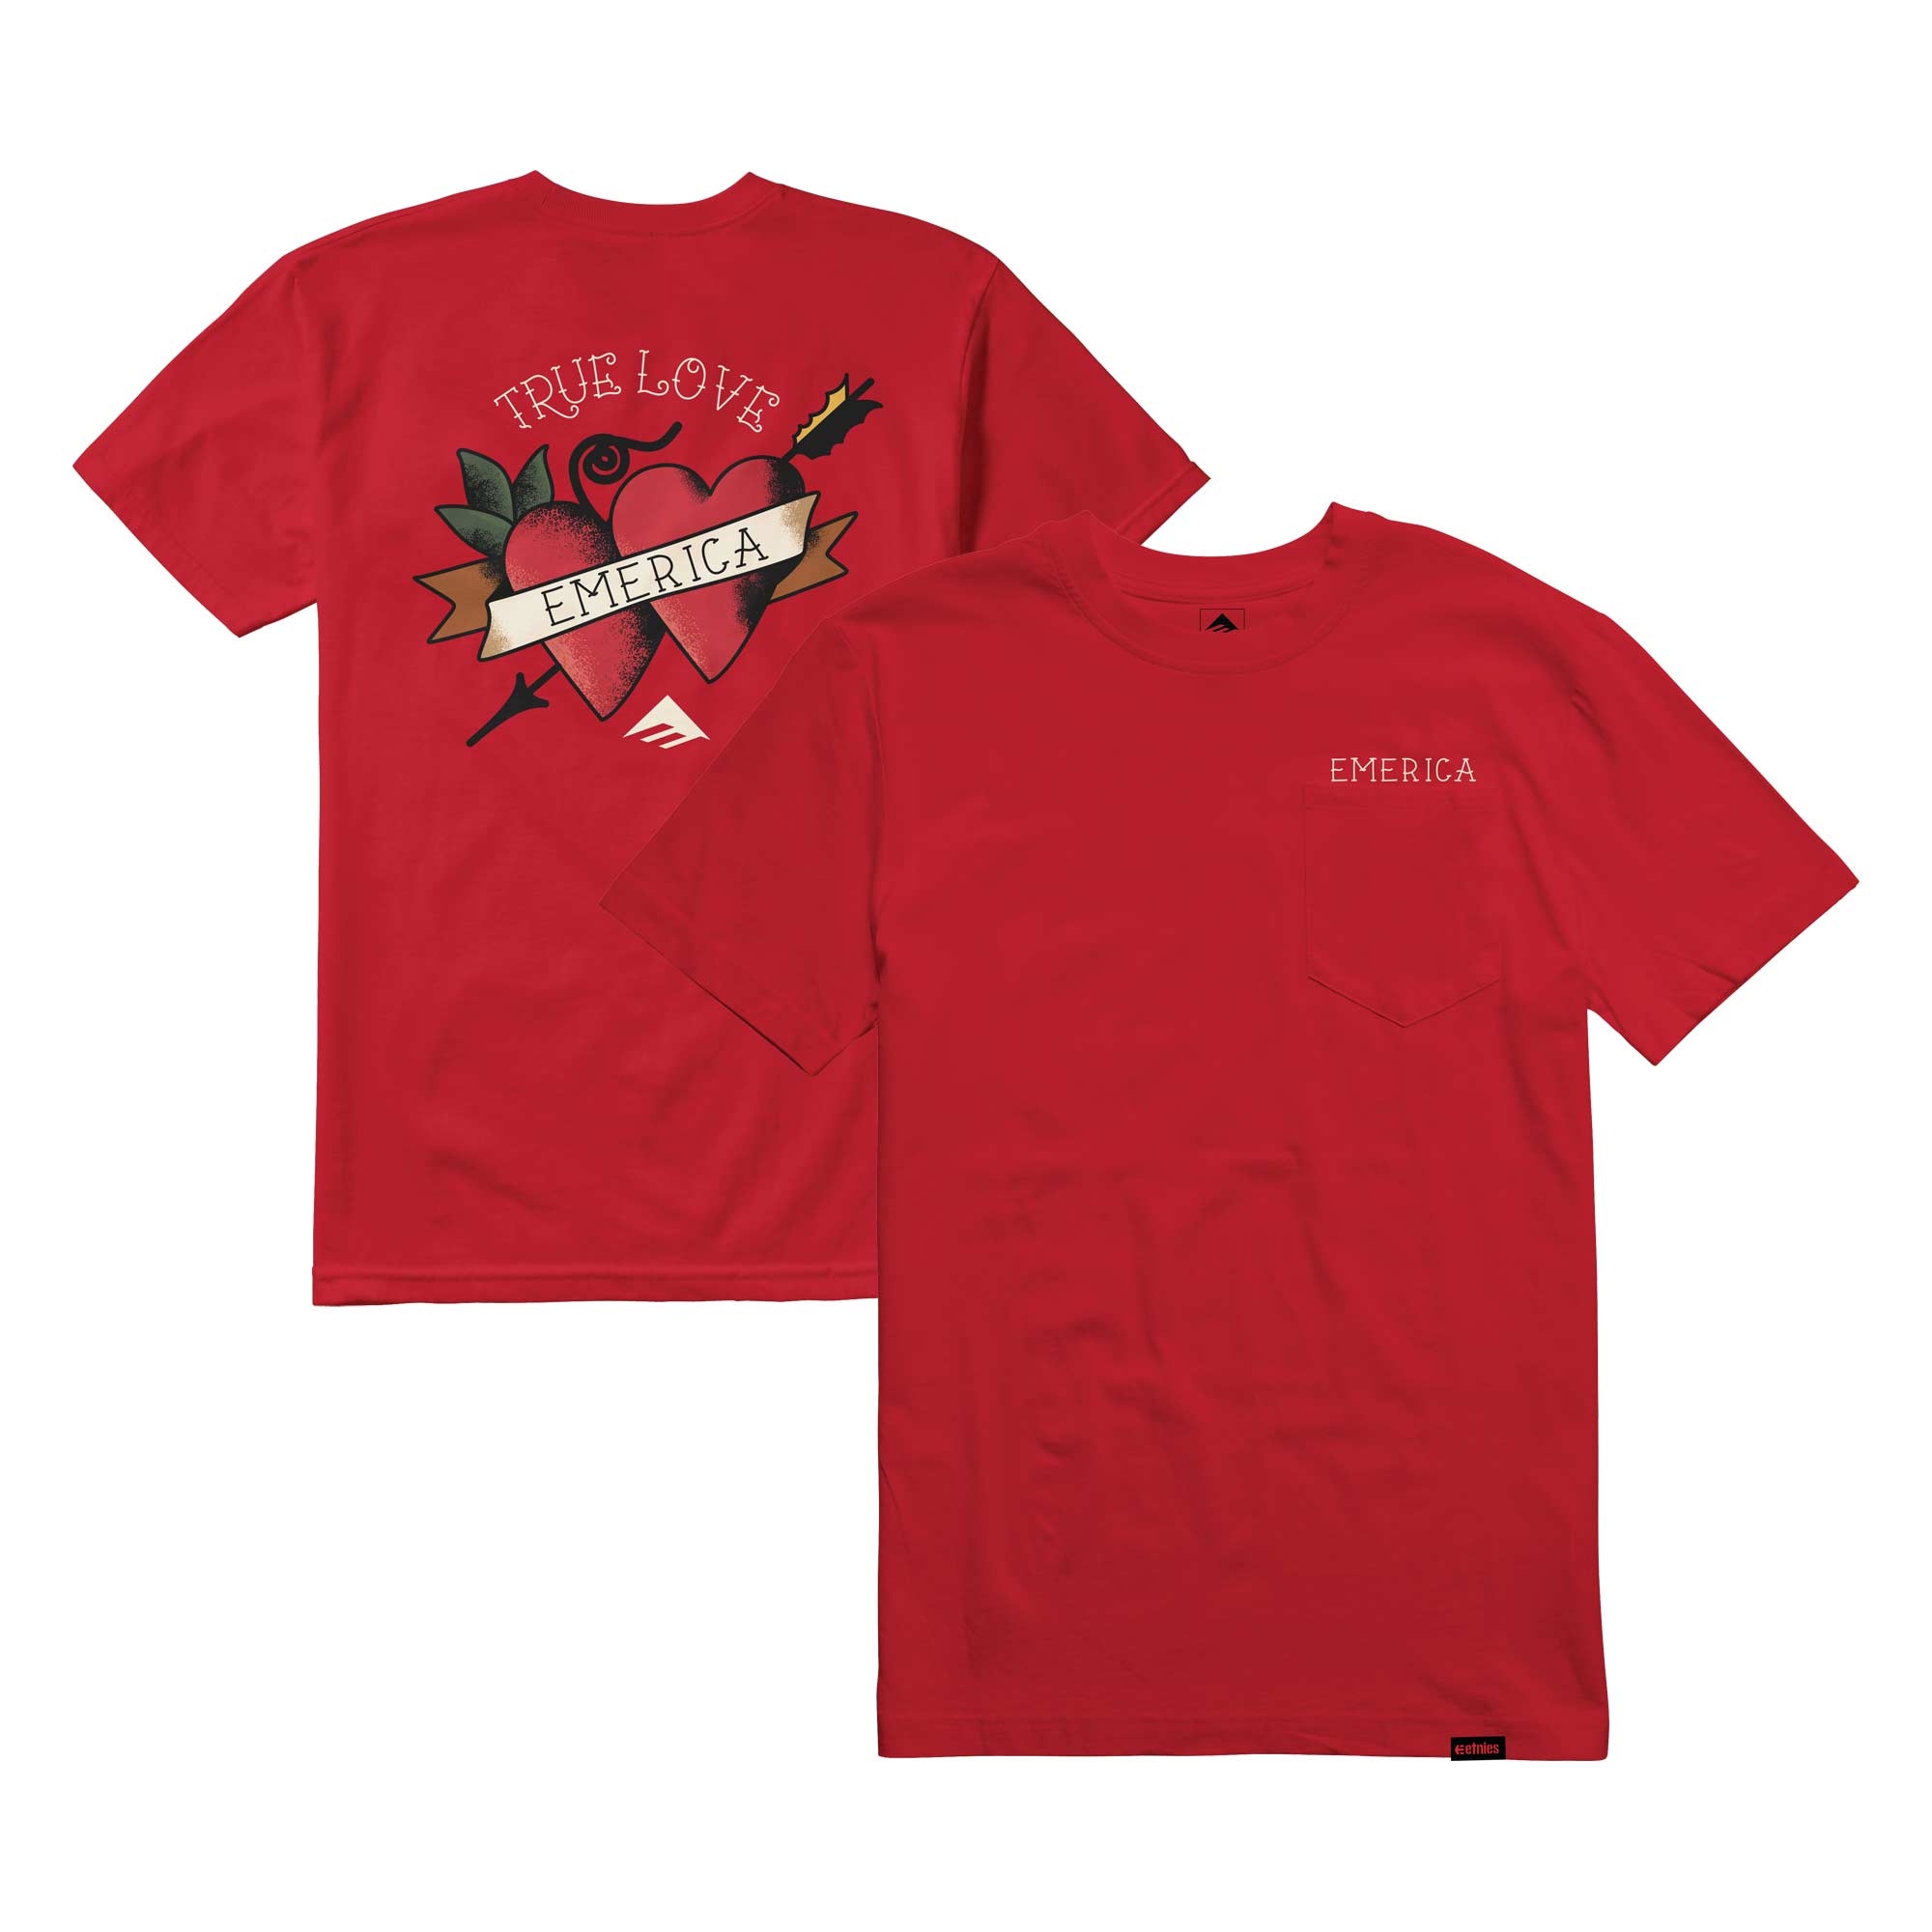 EMERICA T-Shirt LOVE TRIANGLE POCKET red